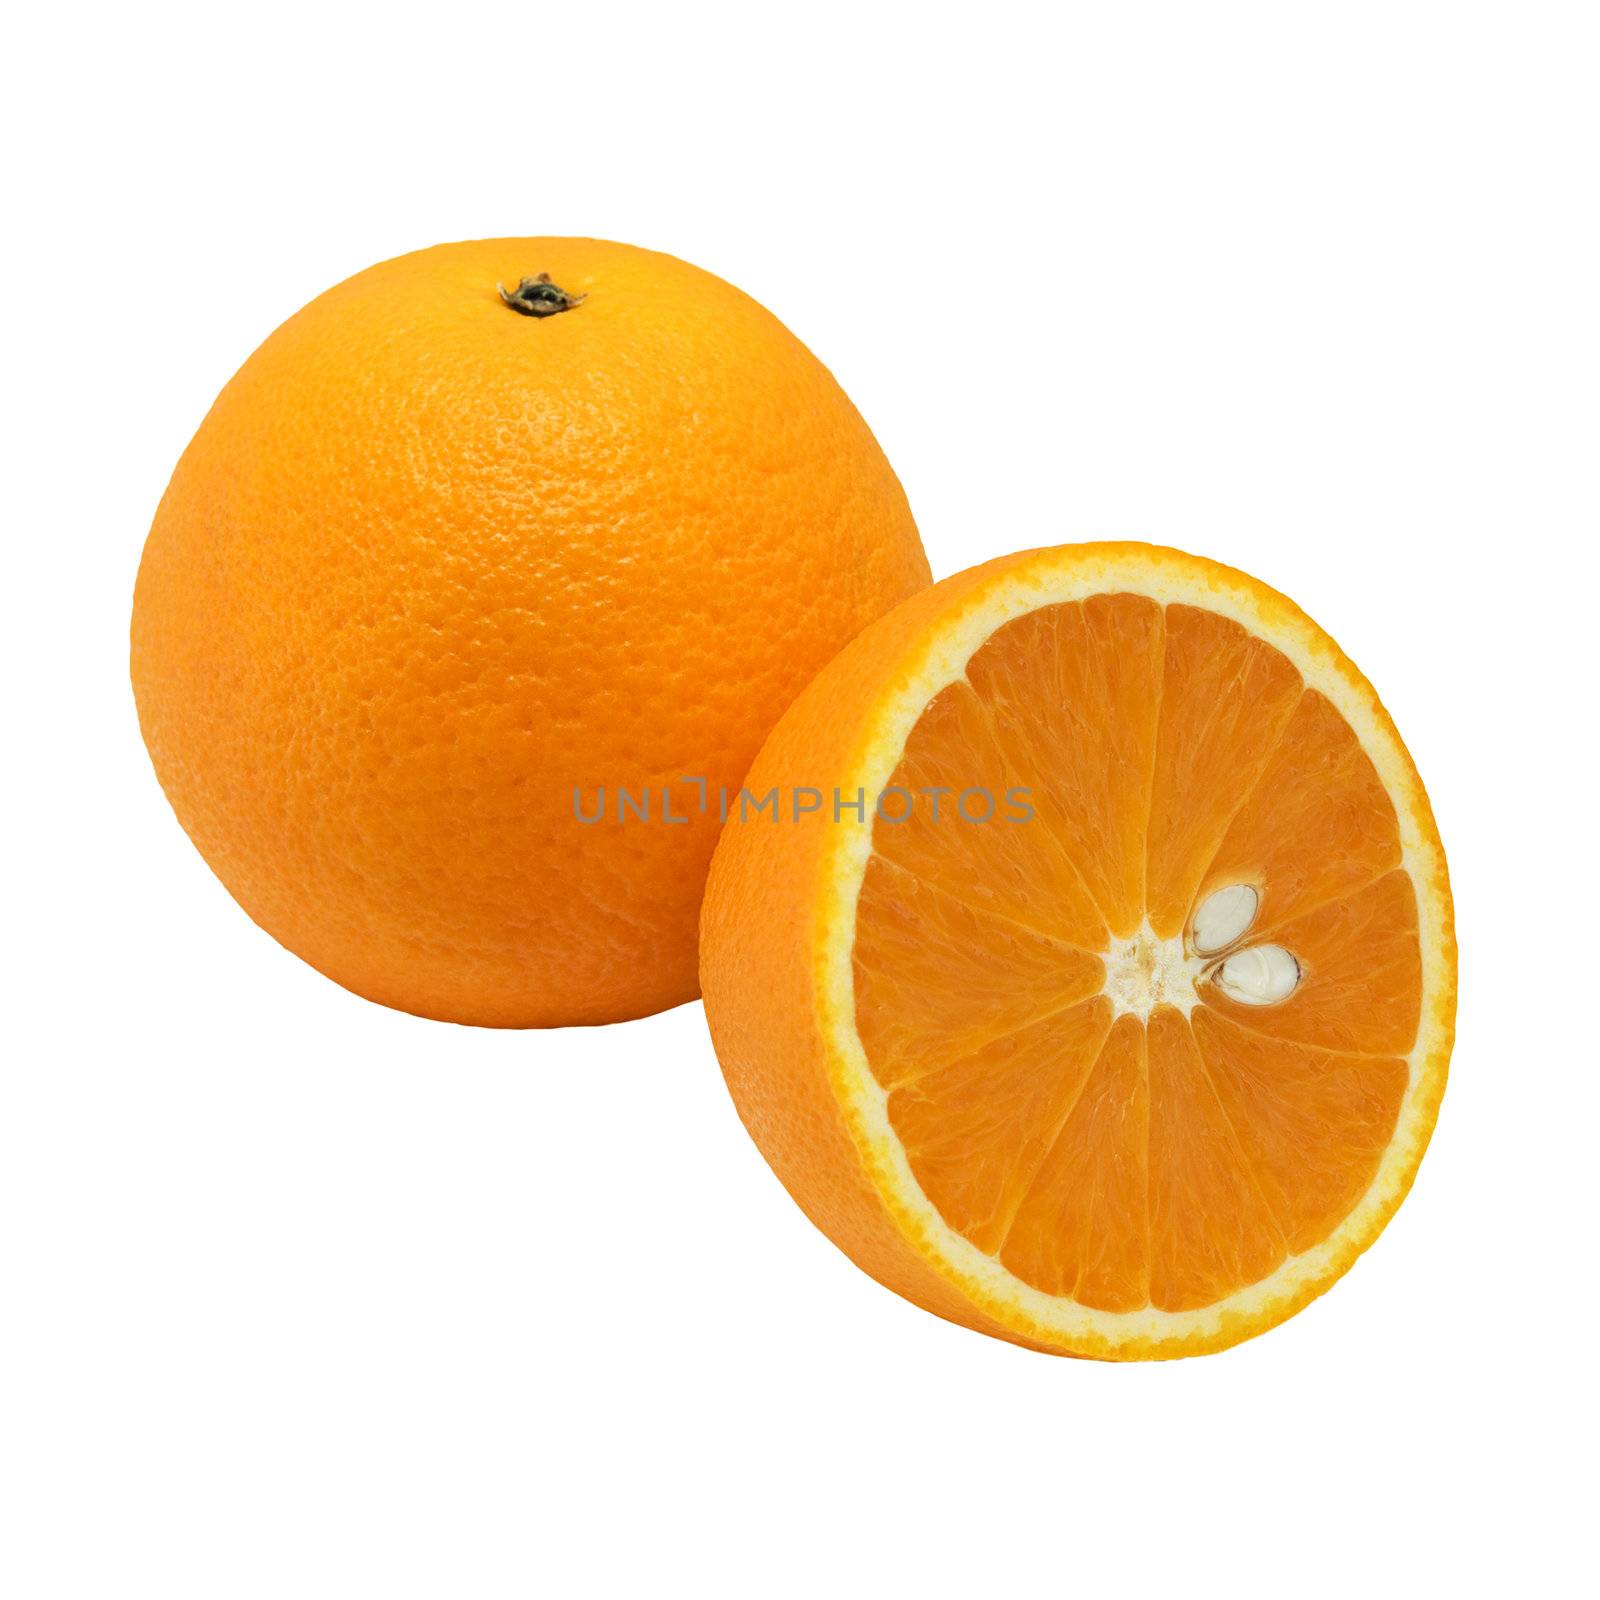 Oranges, the whole and cut, on a white background